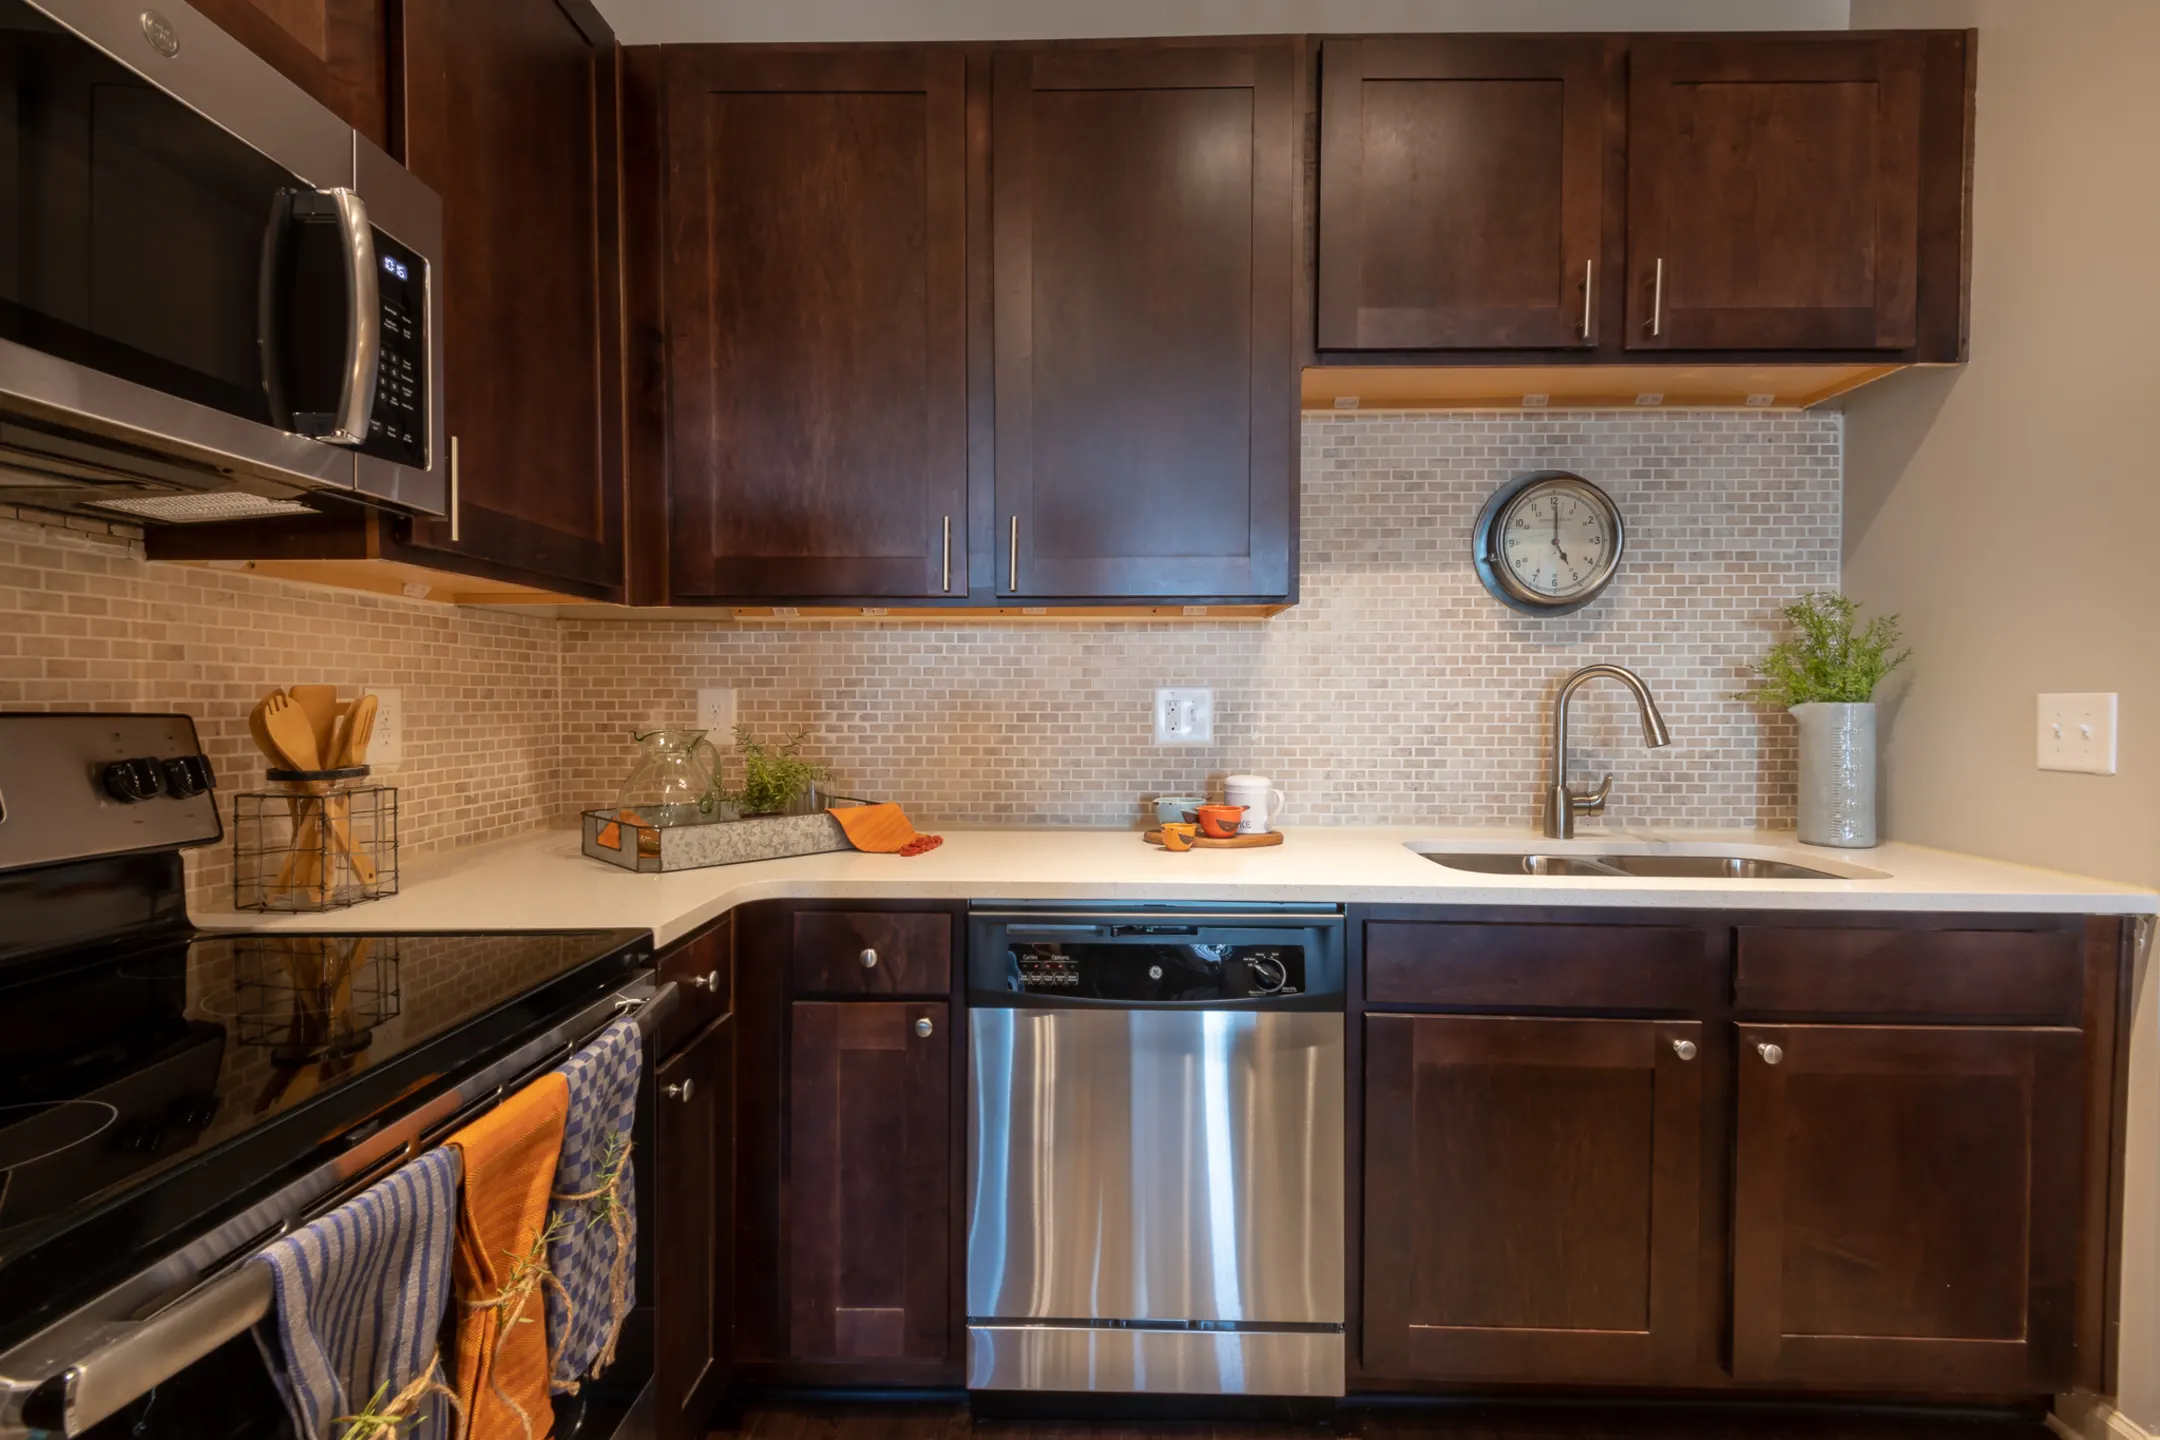 Kitchen - The Crest At Brier Creek Apartments - Raleigh, NC